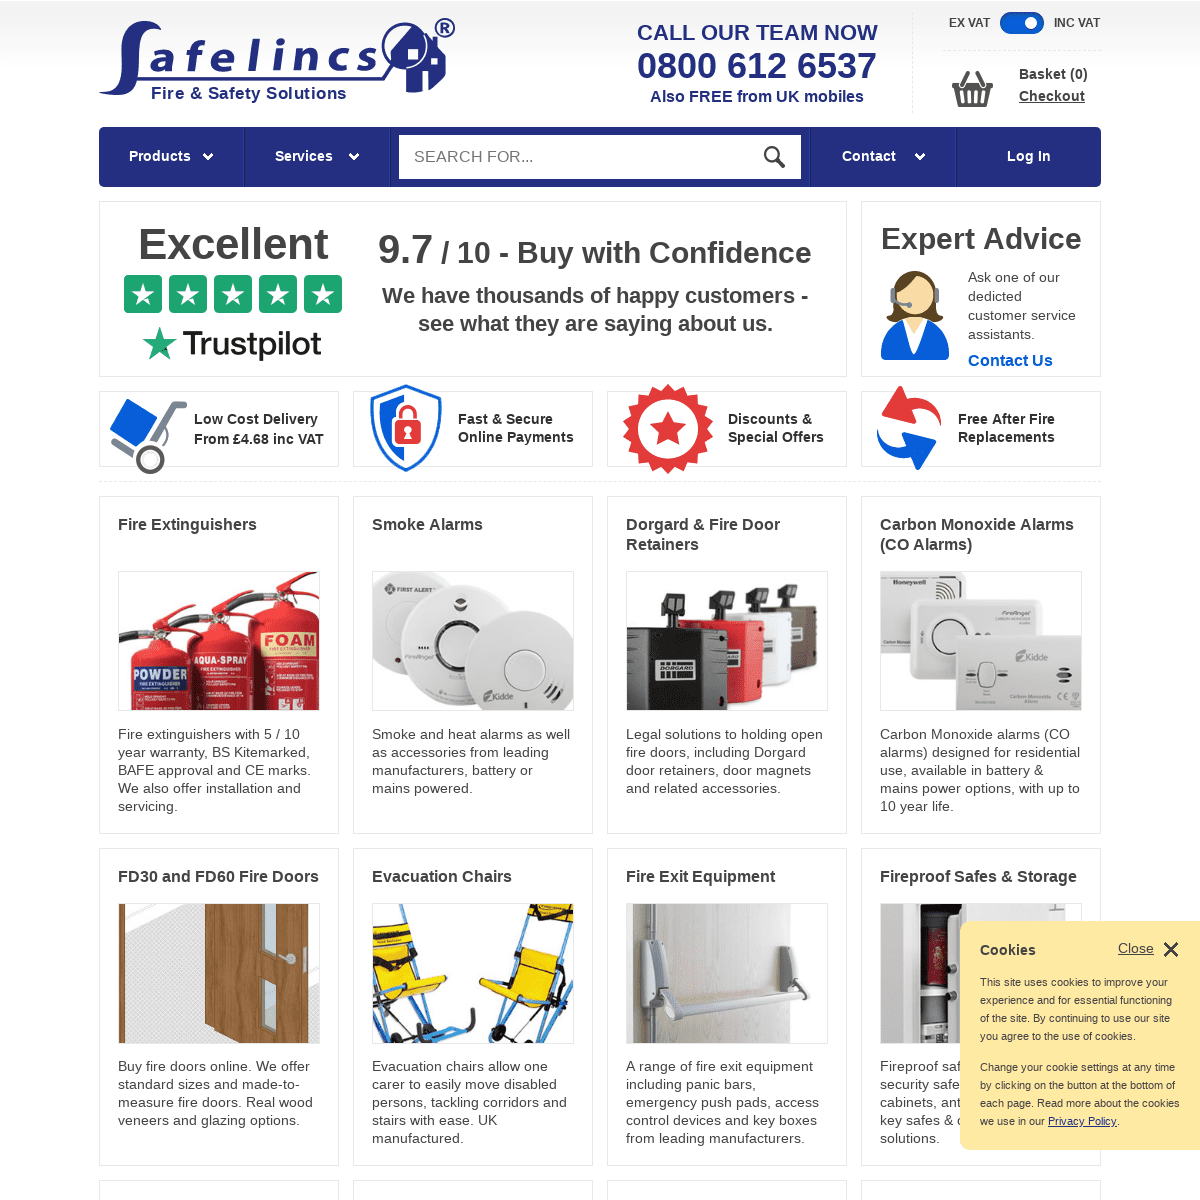 Fire Safety & Fire Protection Equipment